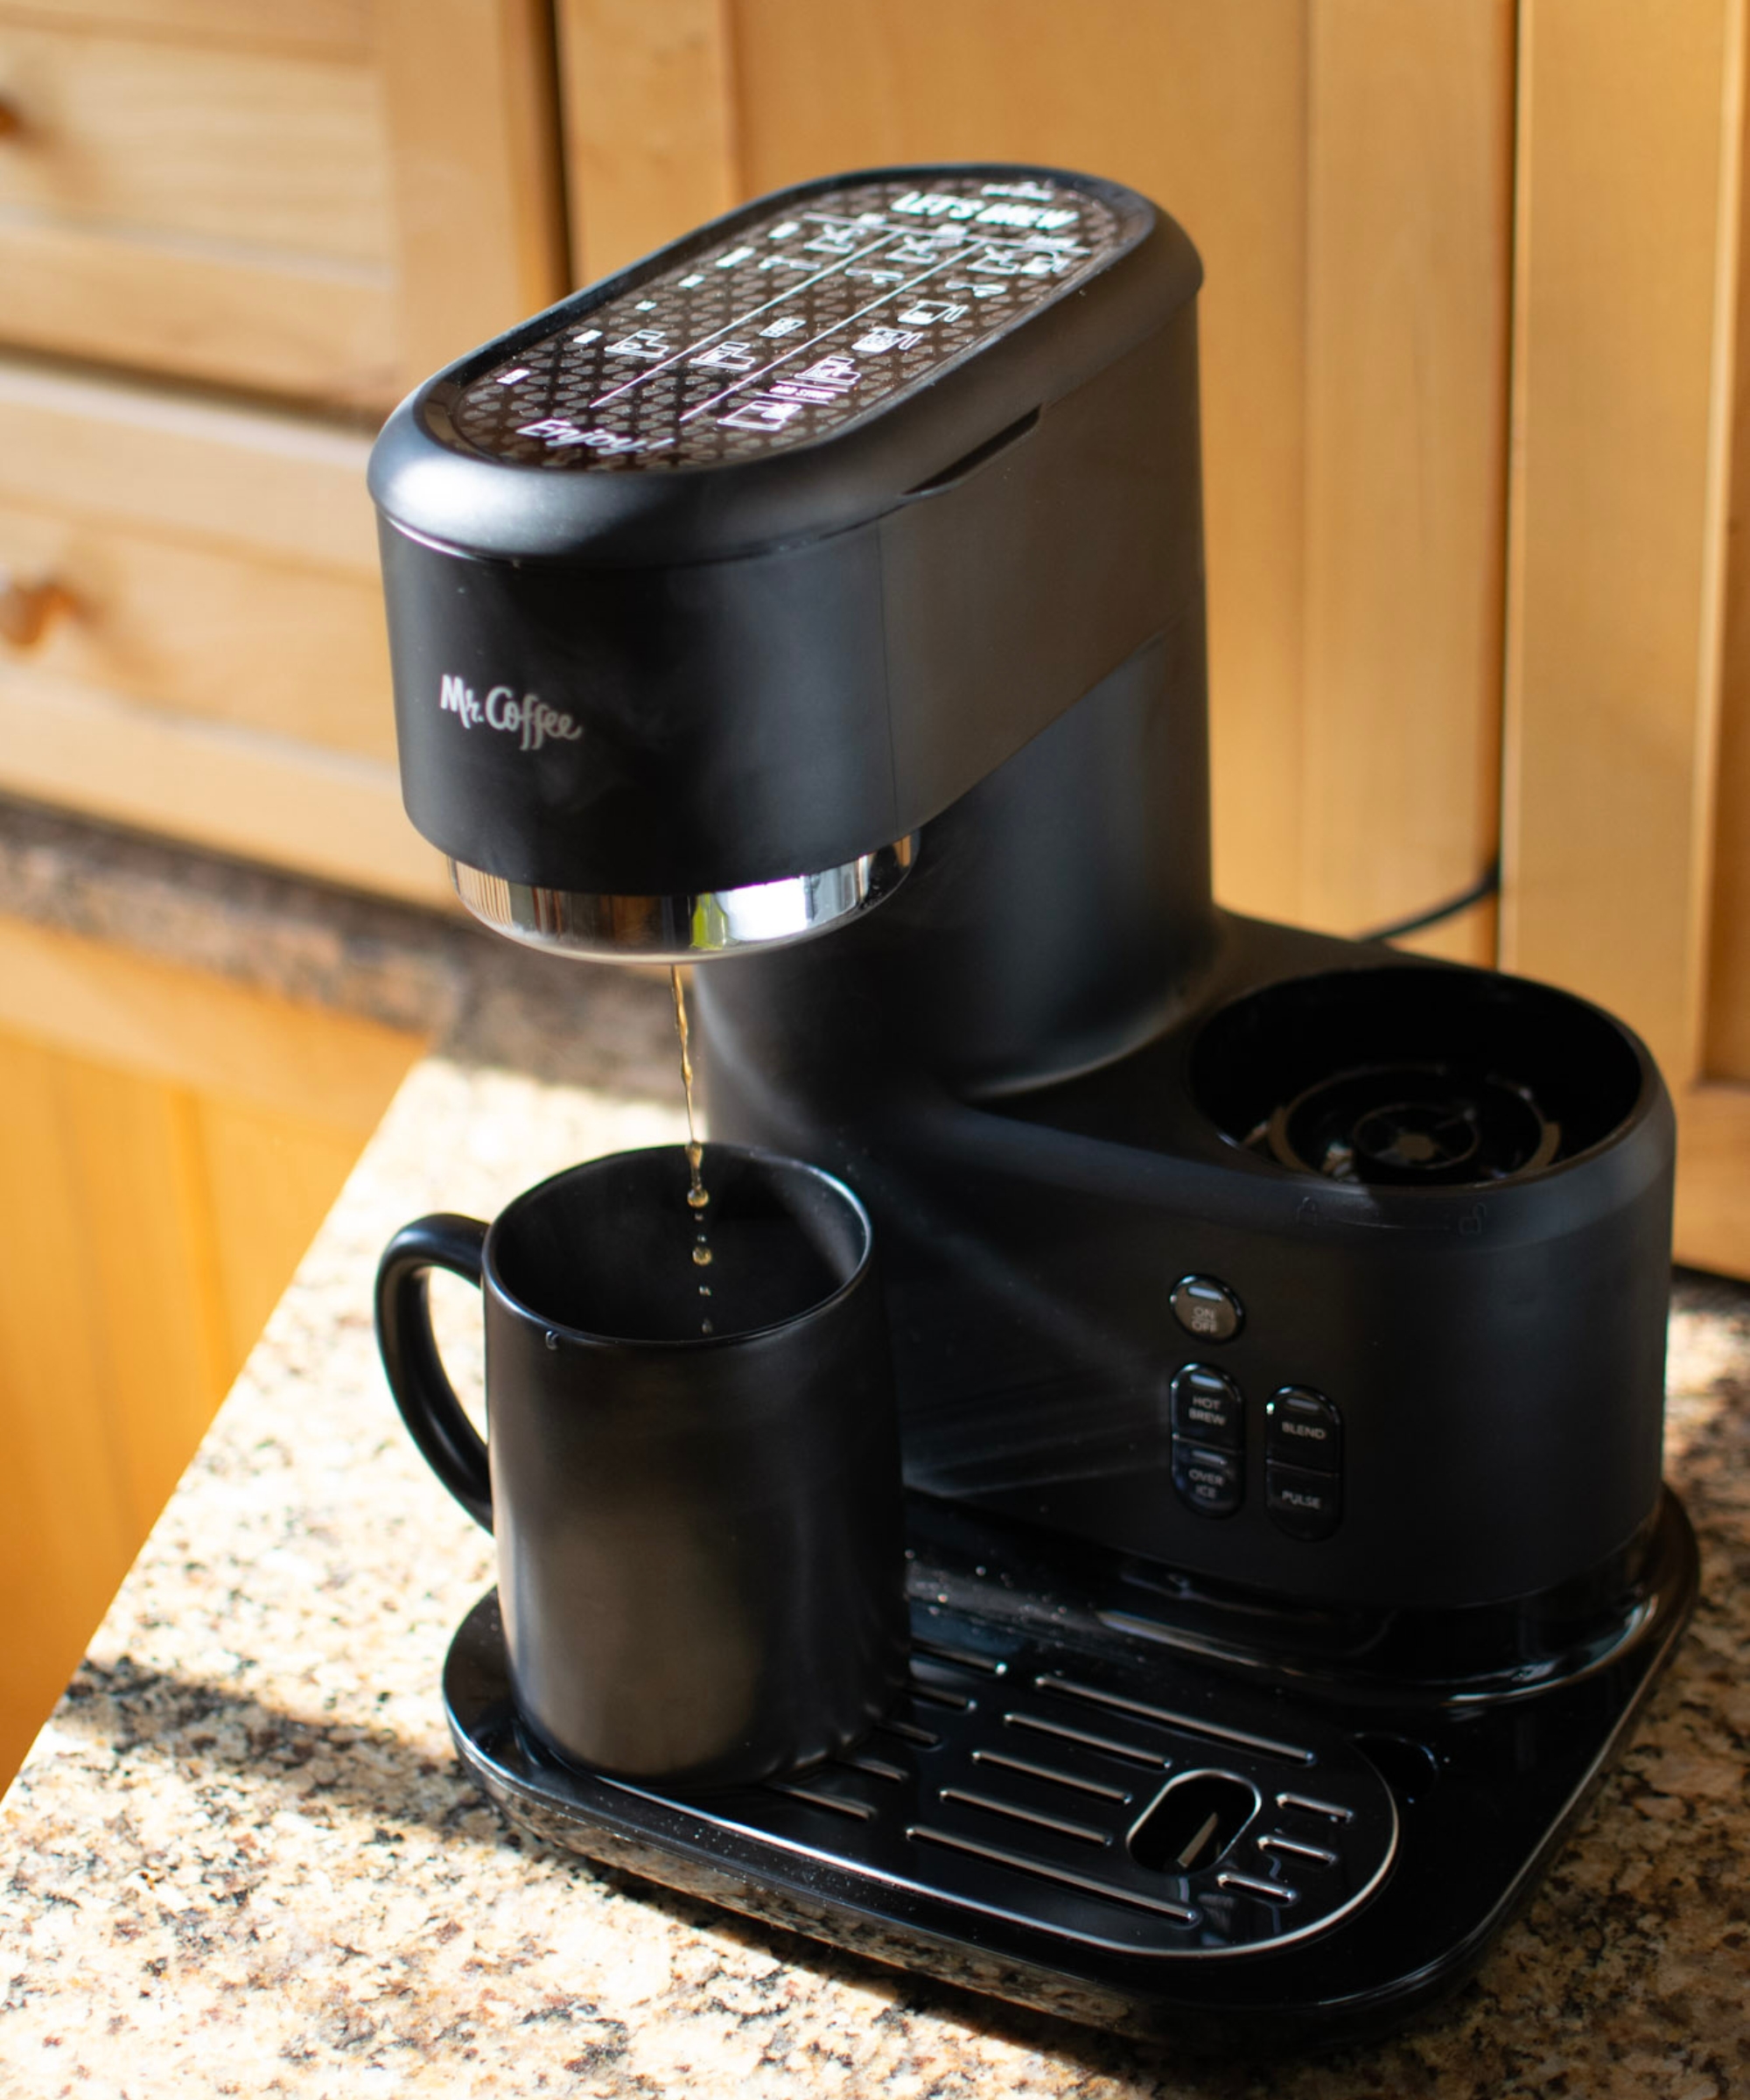 Mr Coffee Frappe Maker Review - Frappe, Iced and Hot Coffee